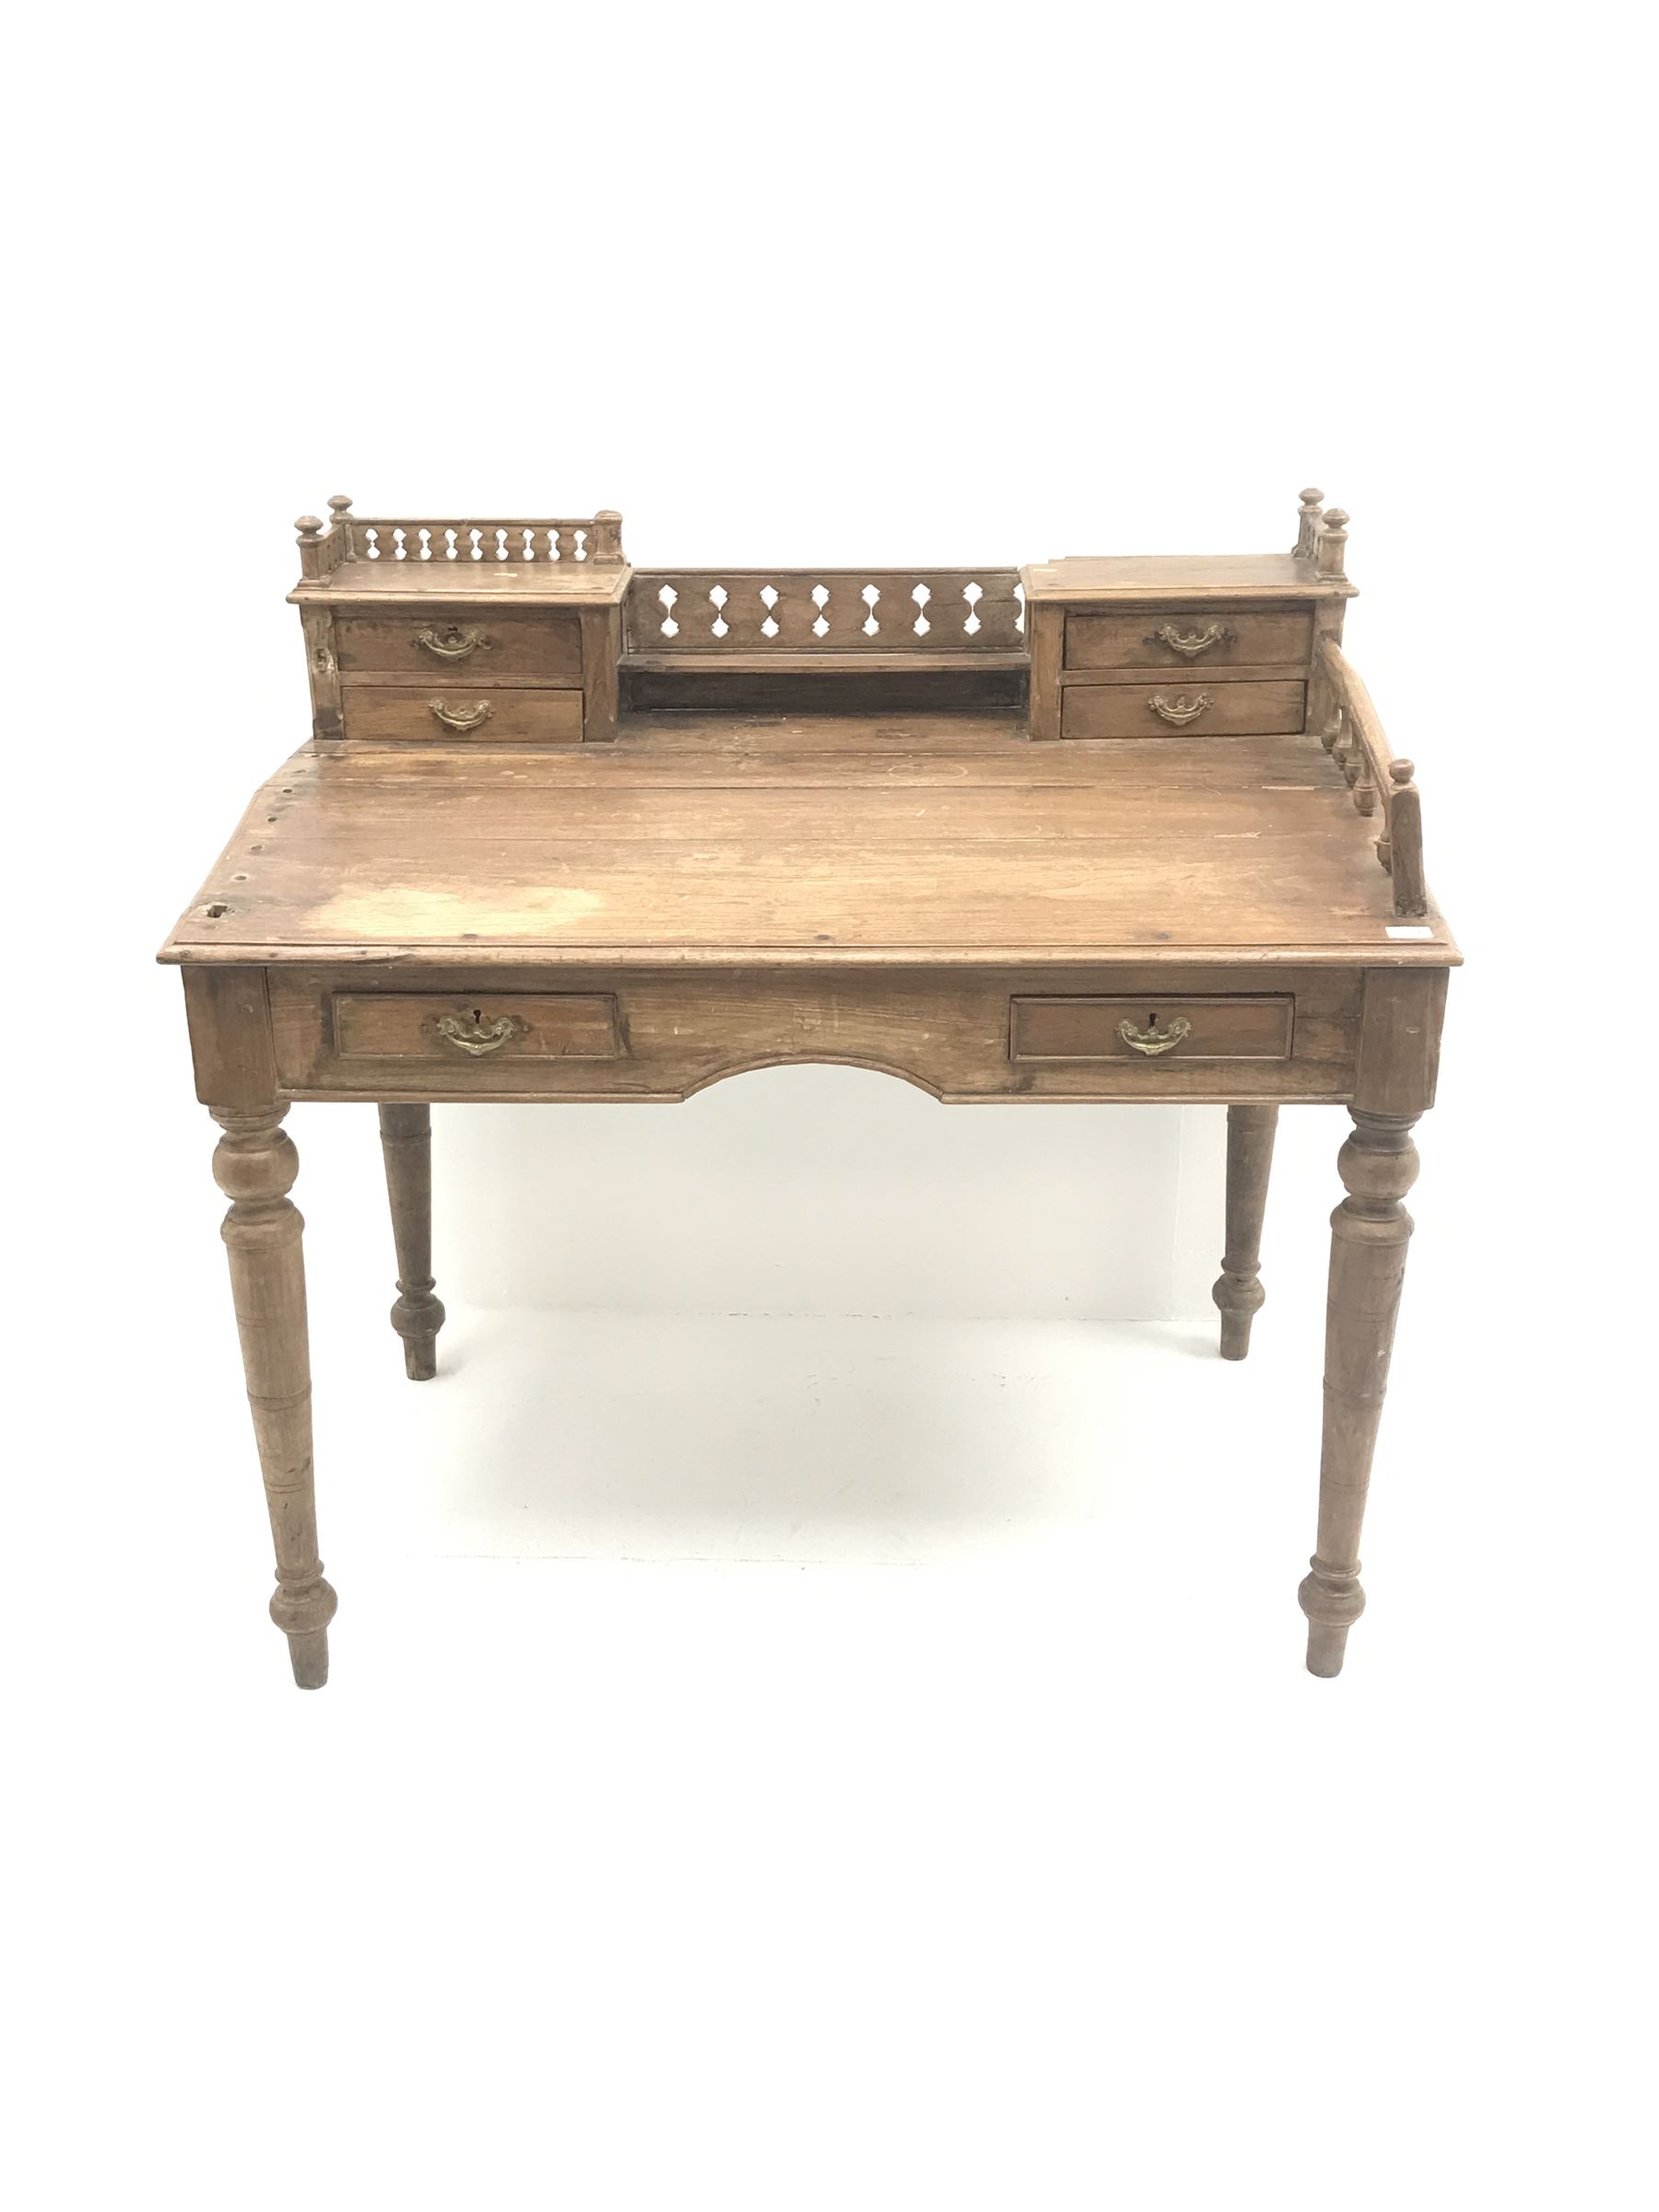 Eastern hardwood clerks desk, raised back with pierced gallery, four small drawers above sloping fro - Image 2 of 4